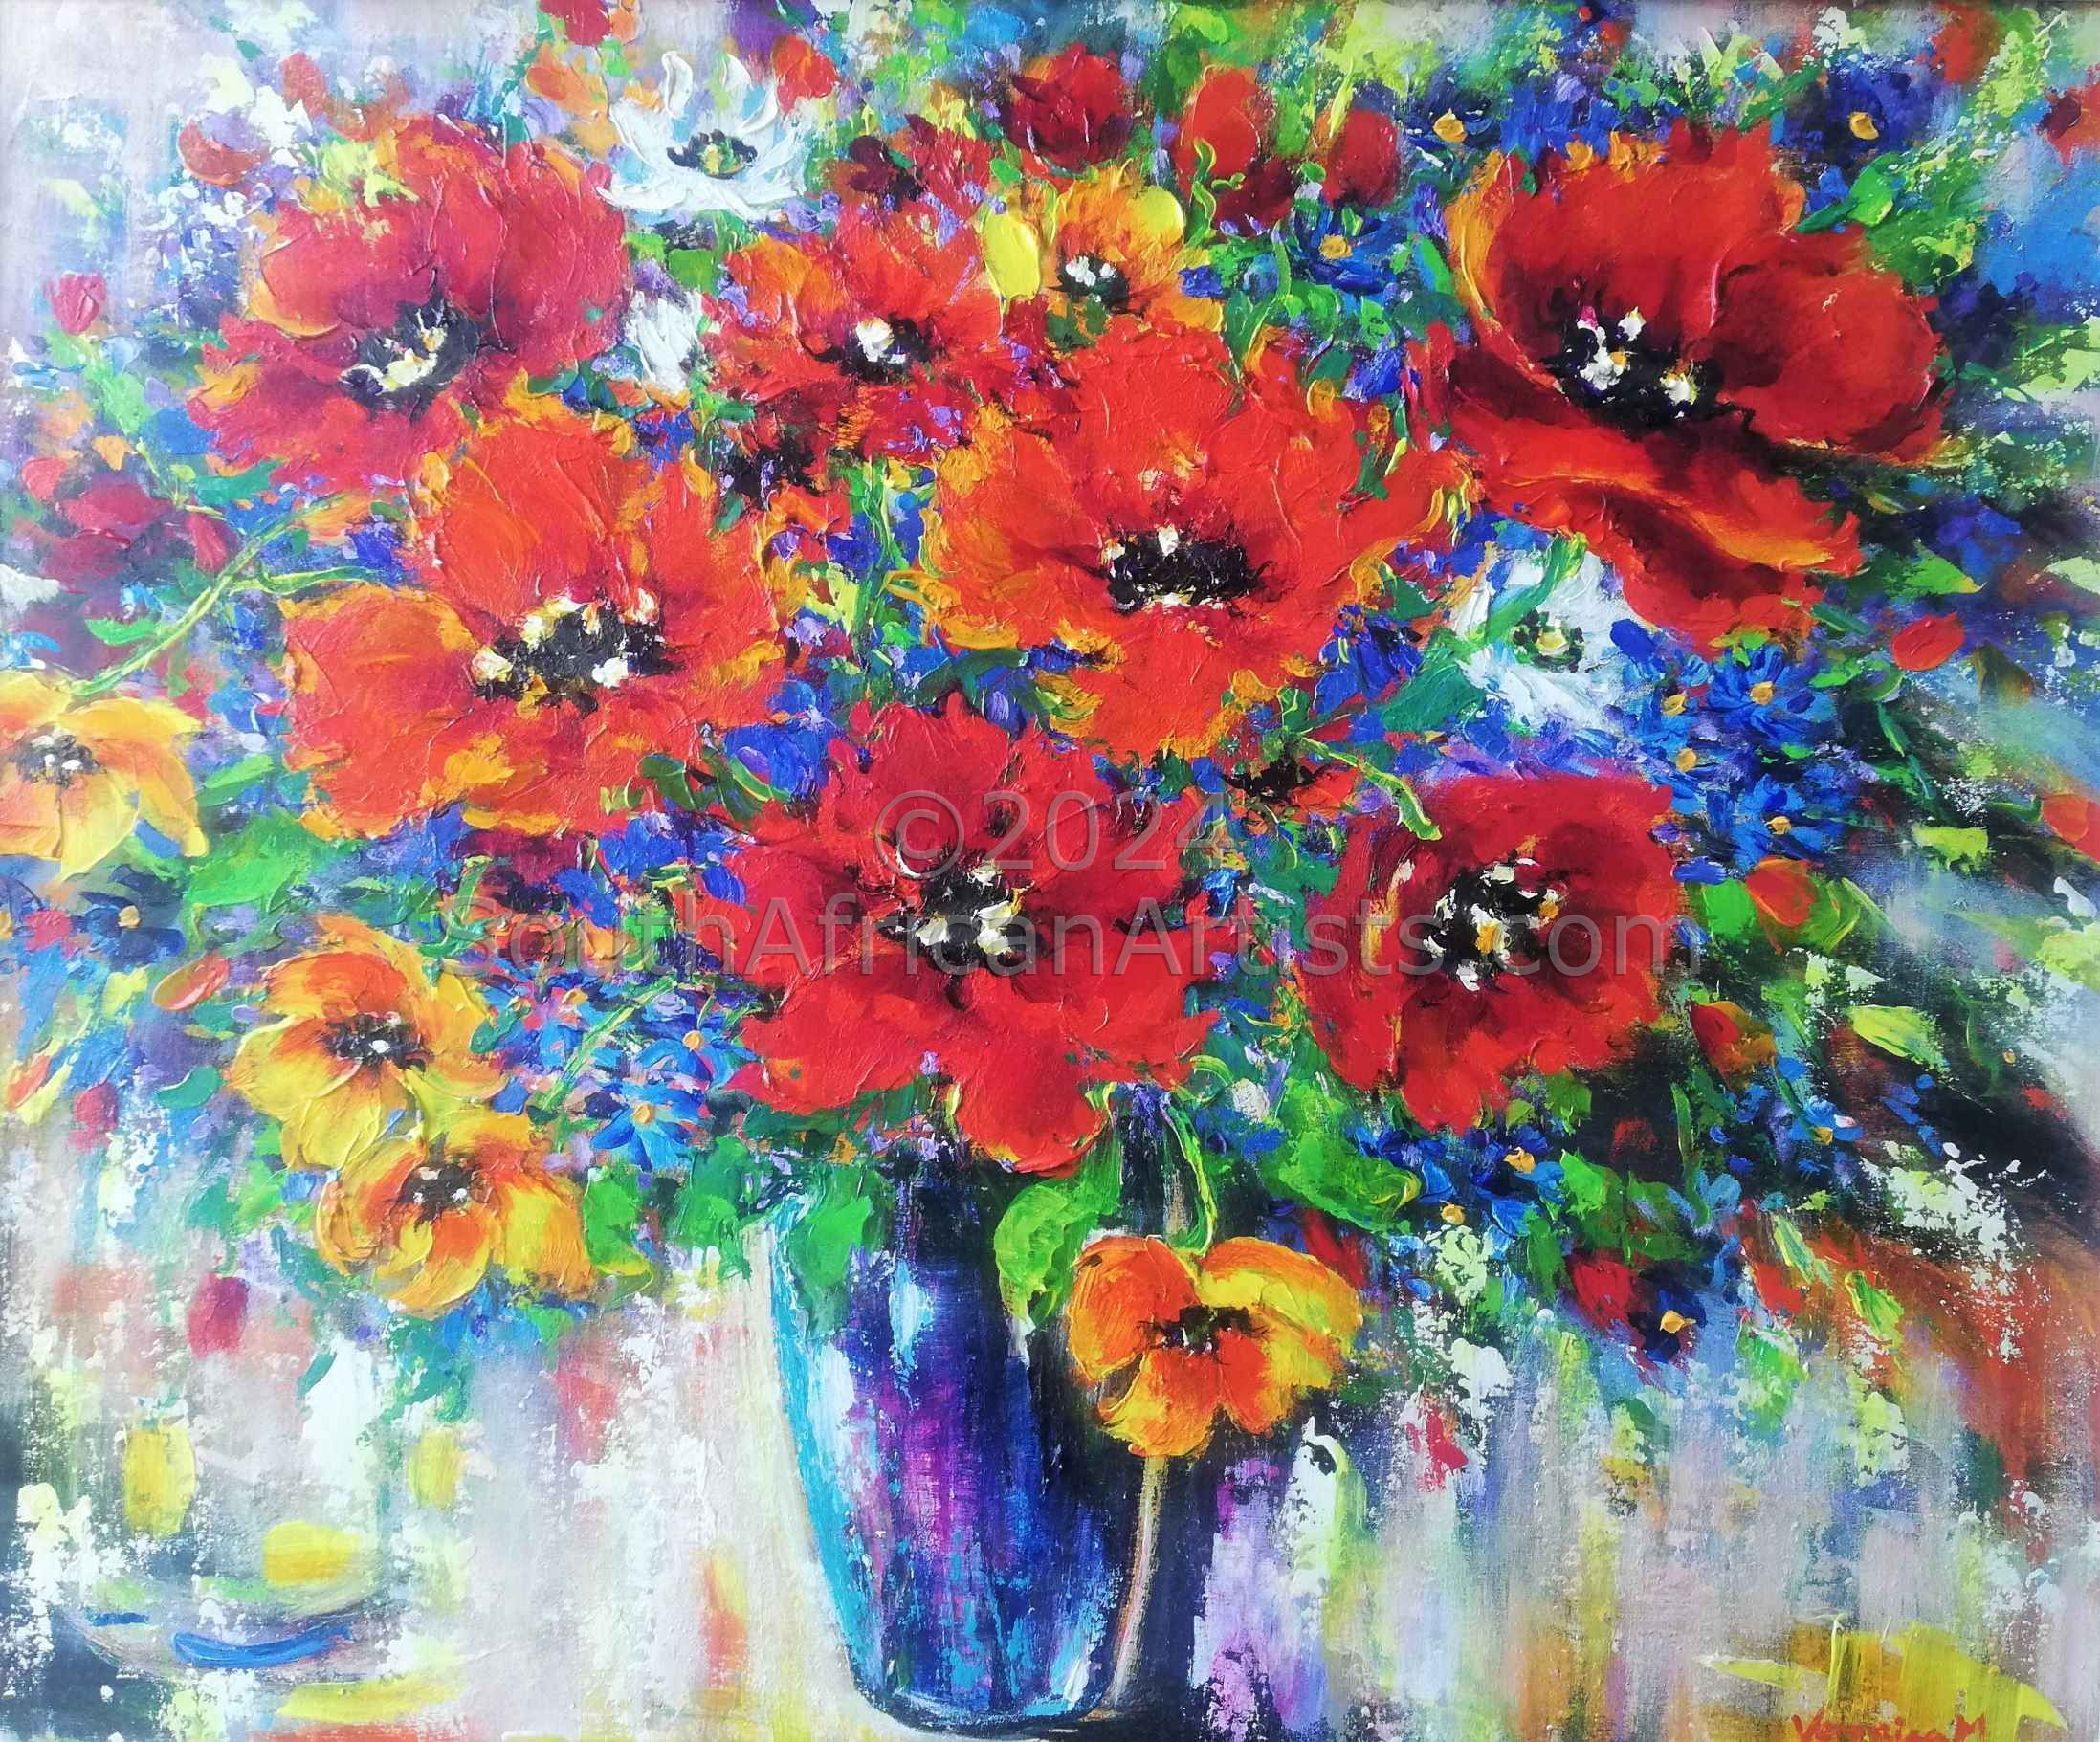 The Poppies In The Vase